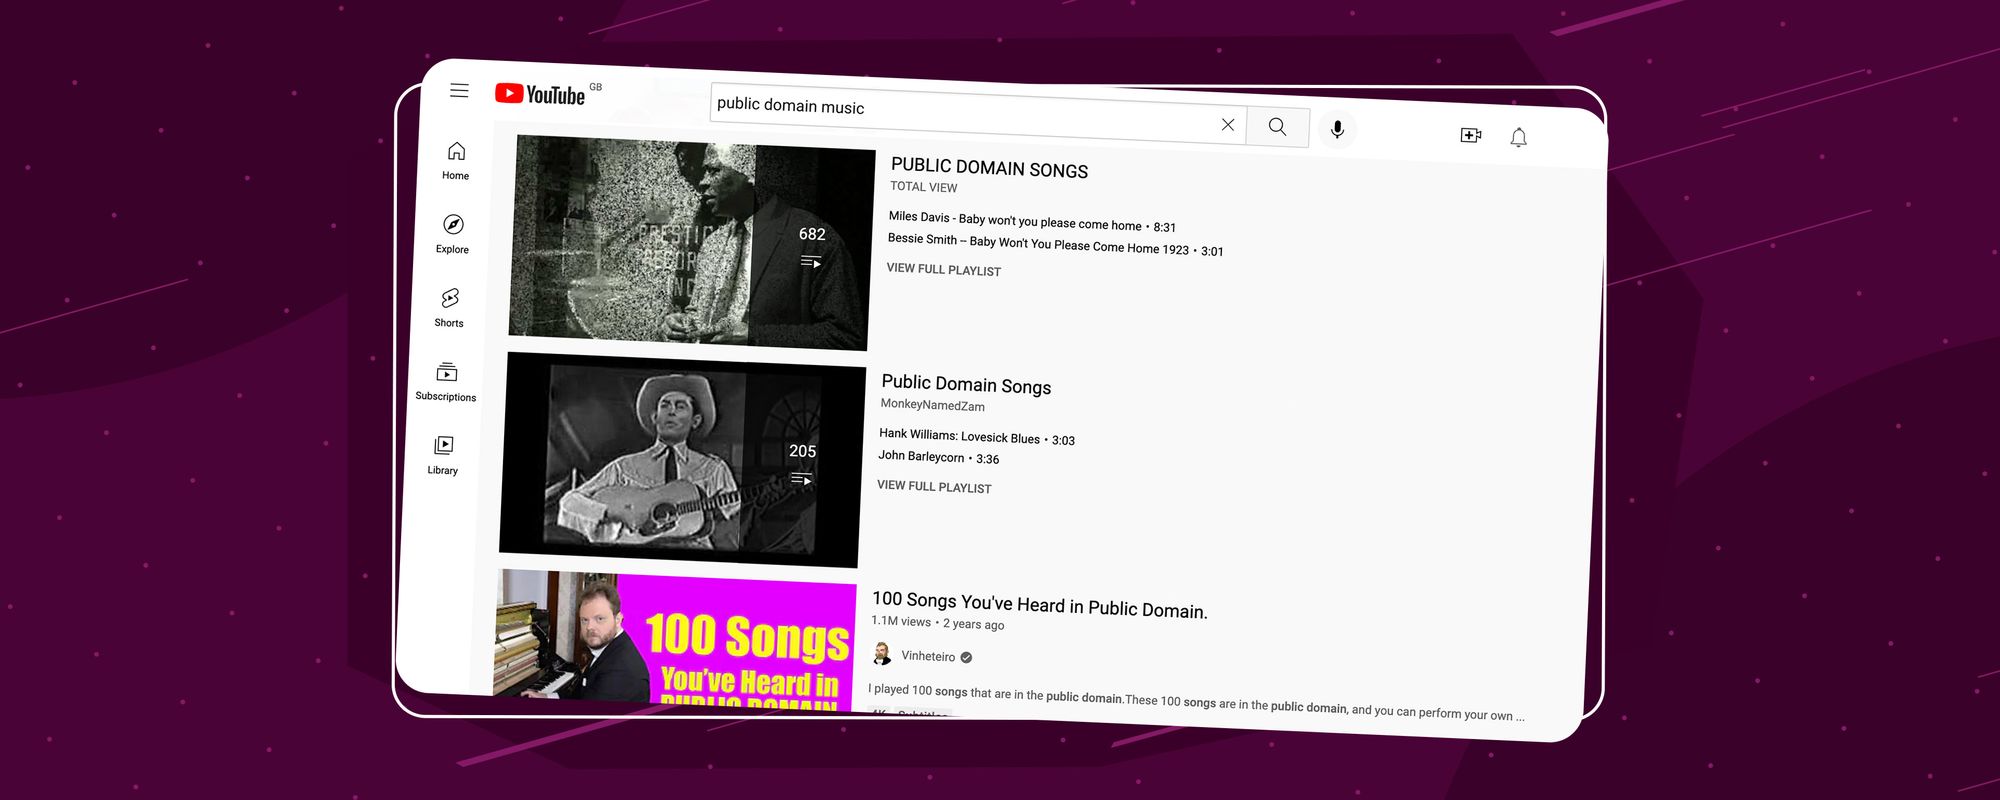 Examples of public domain music available on YouTube